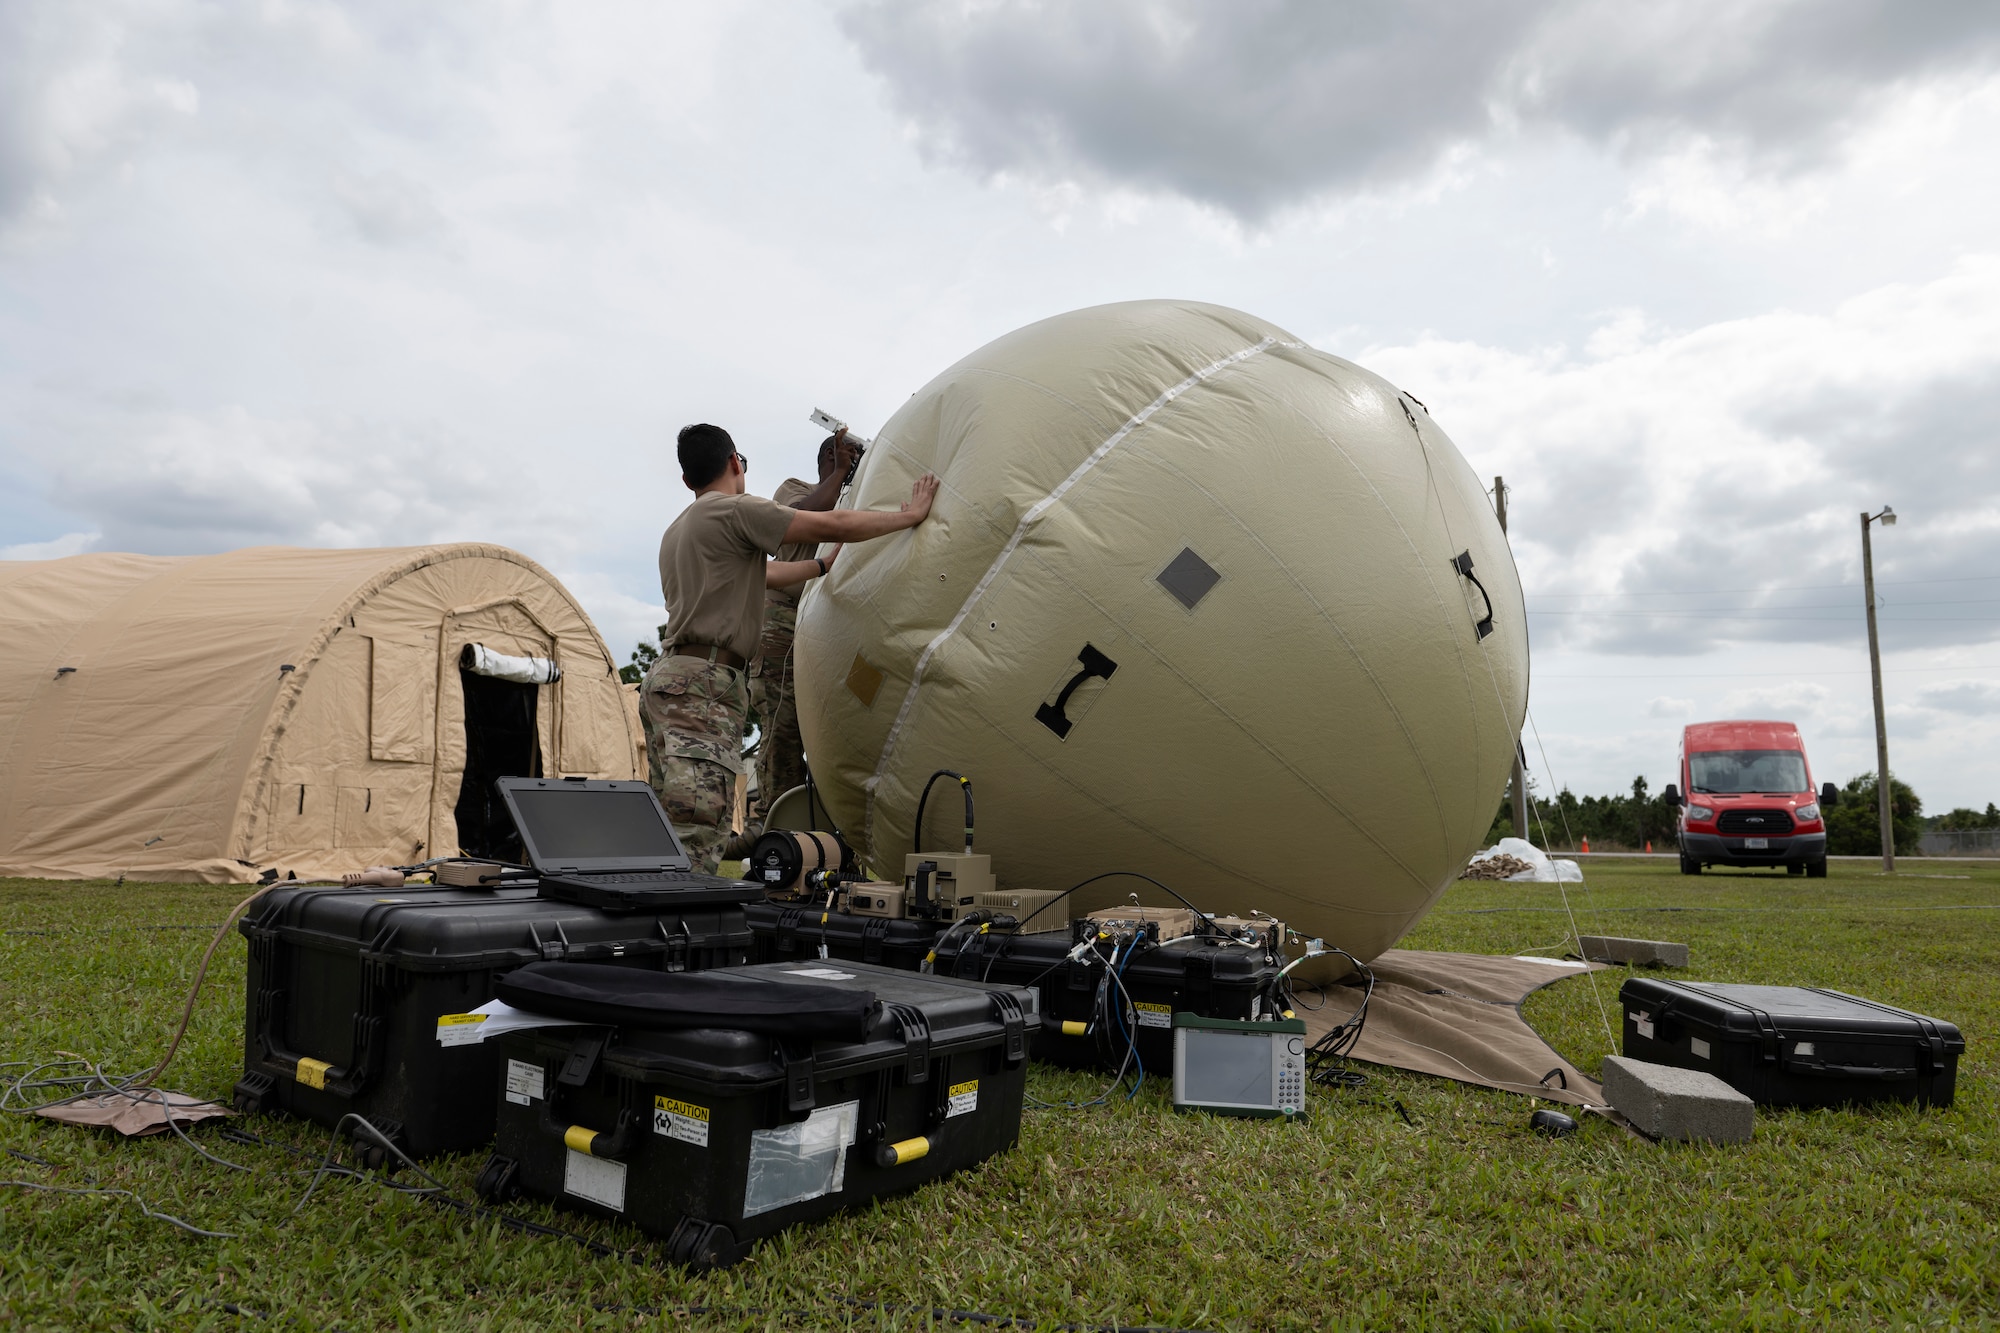 U.S. Air Force Airmen assigned to the 51st Combat Communications Squadron assemble a ground antenna transmit and receive (GATR) ball at Avon Park Air Force Range, Florida, April 9, 2024. The GATR ball was used during Exercise Ready Tiger 24-1 to provide personnel at Avon Park with Secret Internet Protocol Router network and Non-classified Internet Protocol Router network capabilities. The Ready Tiger 24-1 exercise evaluators will assess the 23rd Wing's proficiency in employing decentralized command and control to fulfill air tasking orders across geographically dispersed areas amid communication challenges. (U.S. Air Force photo by Senior Airman Rachel Coates)